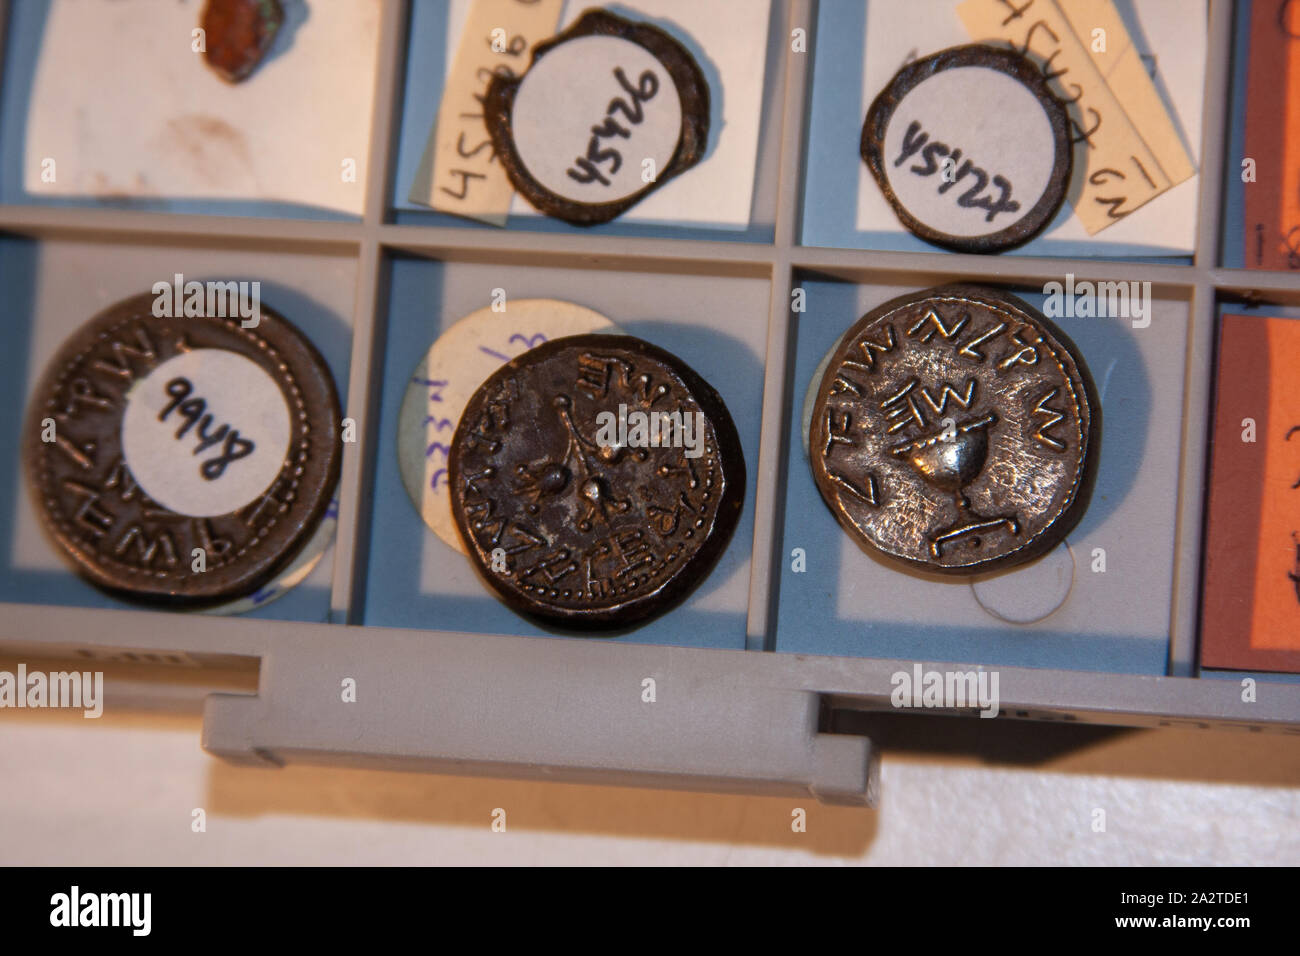 Coins from the Second Temple period Israel Antiquities Authority Stock Photo